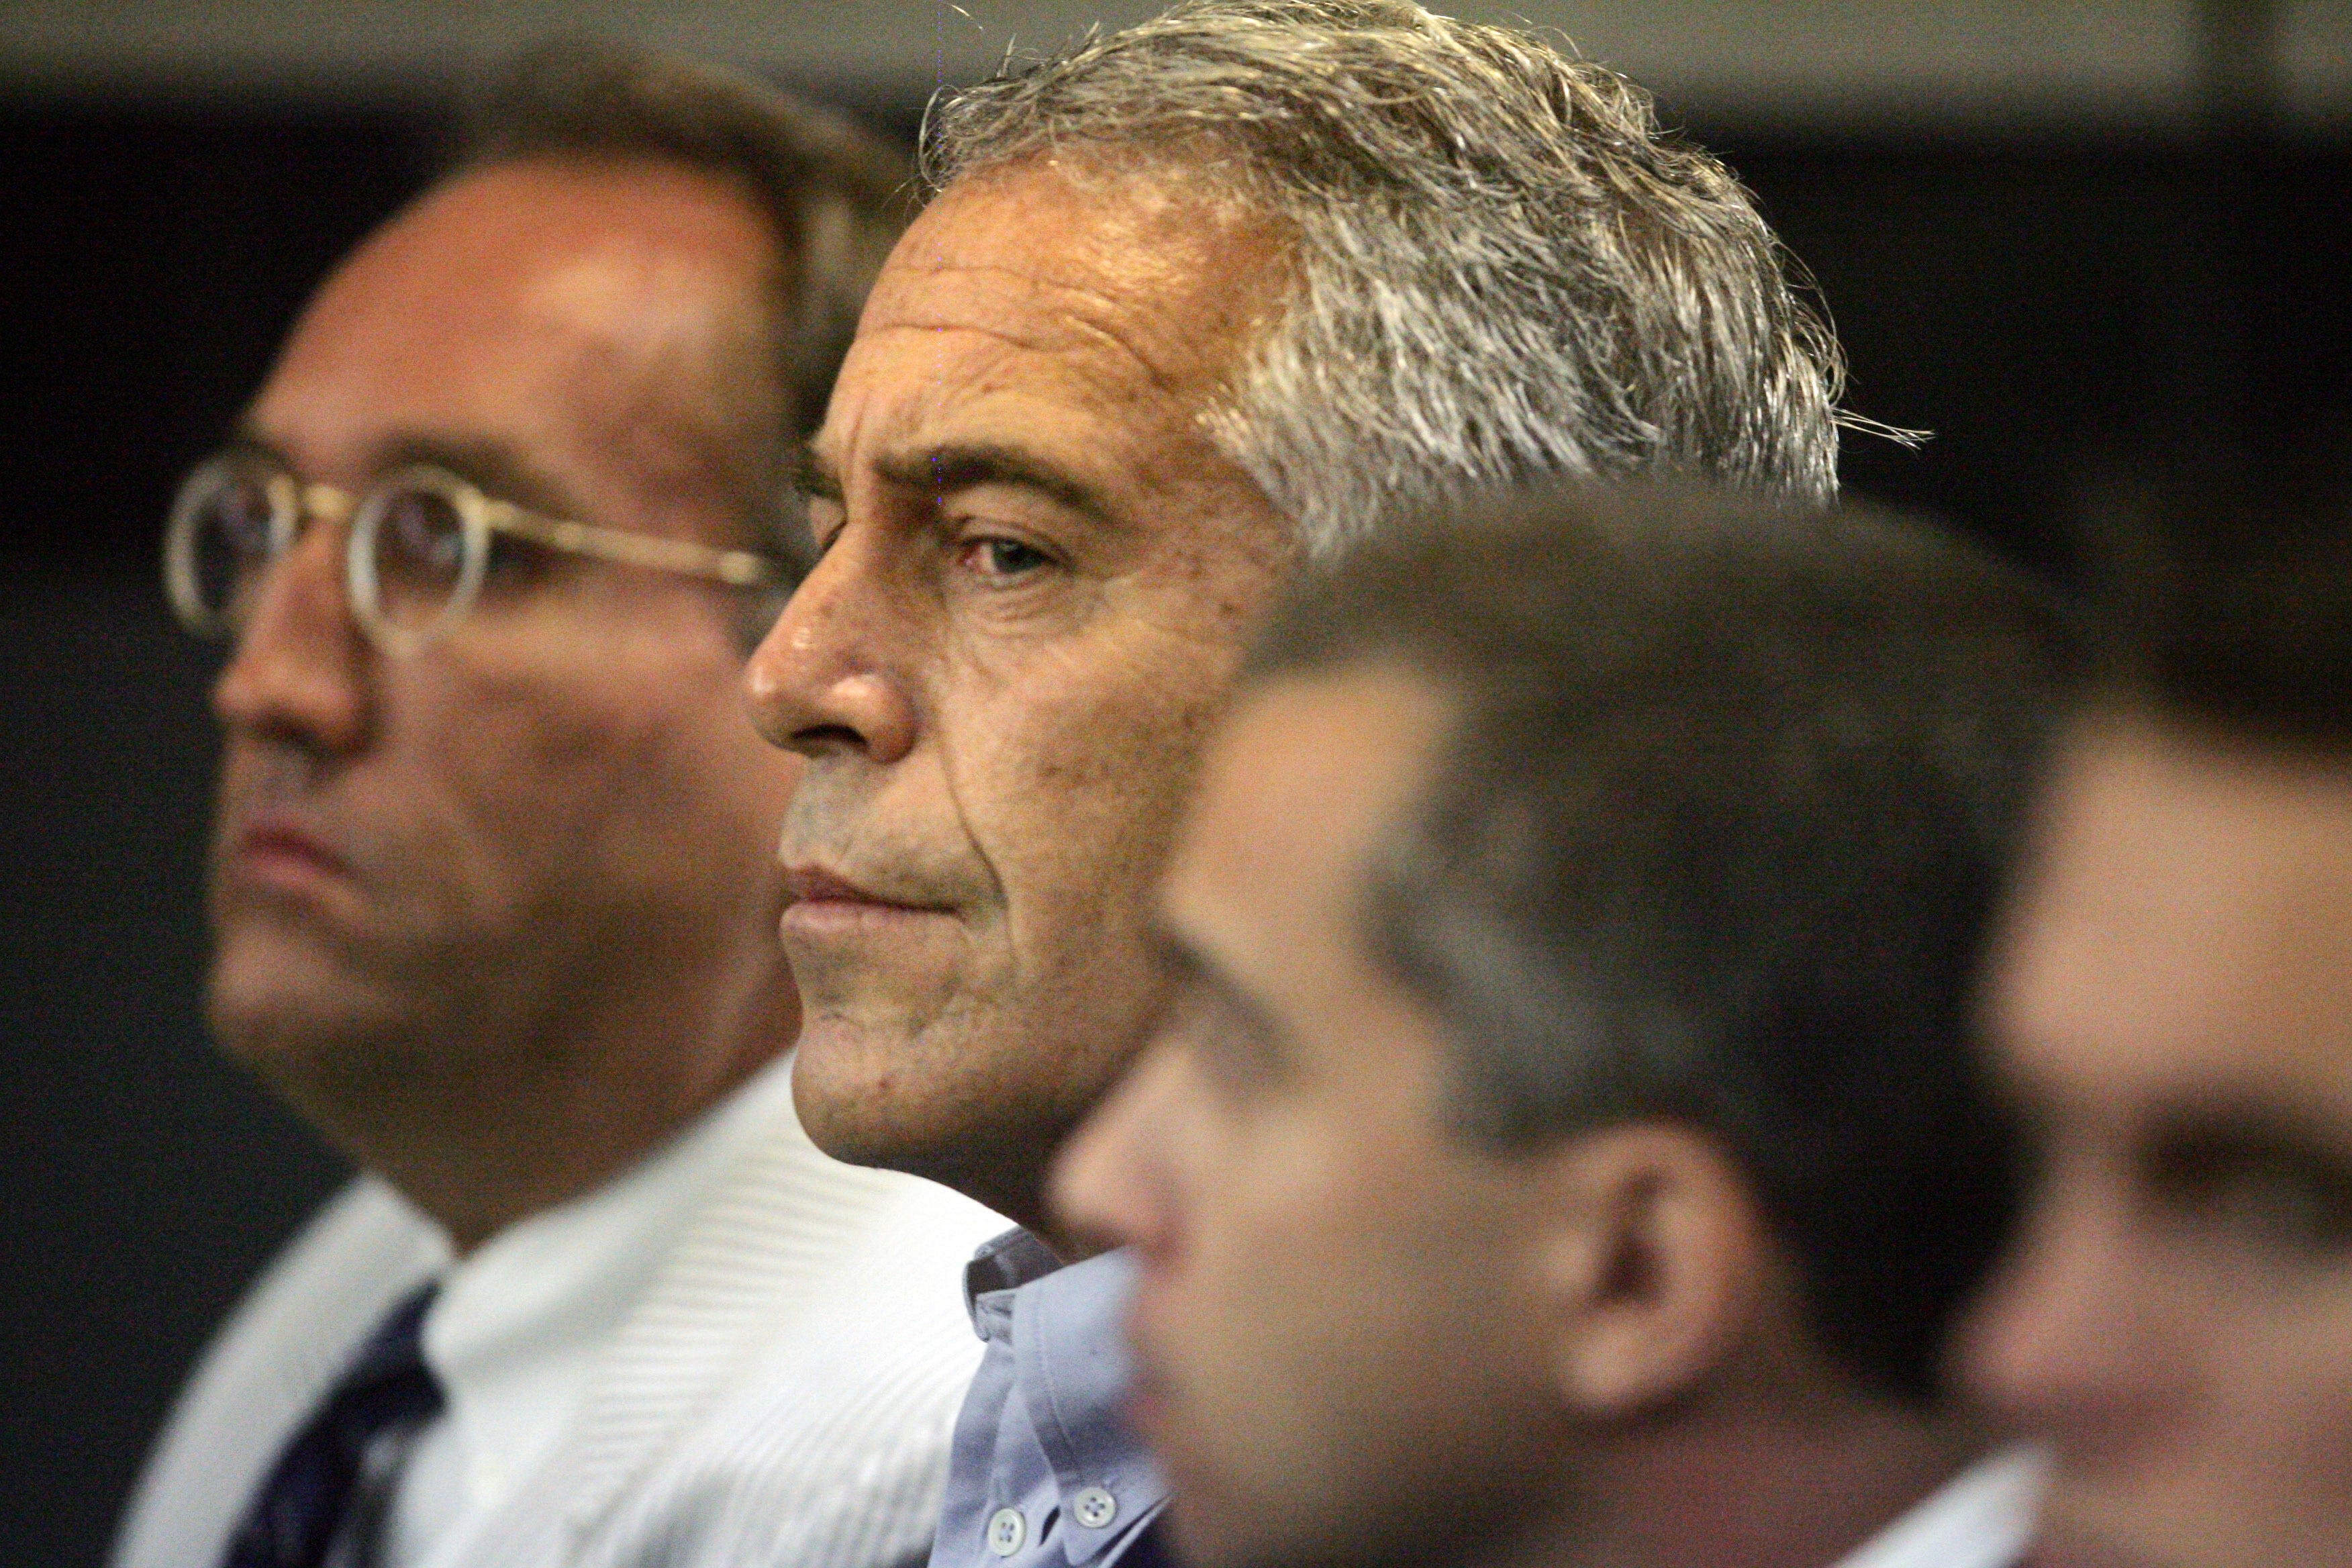 Jeffrey Epstein, a survivor’s untold story and the complexity of abuse